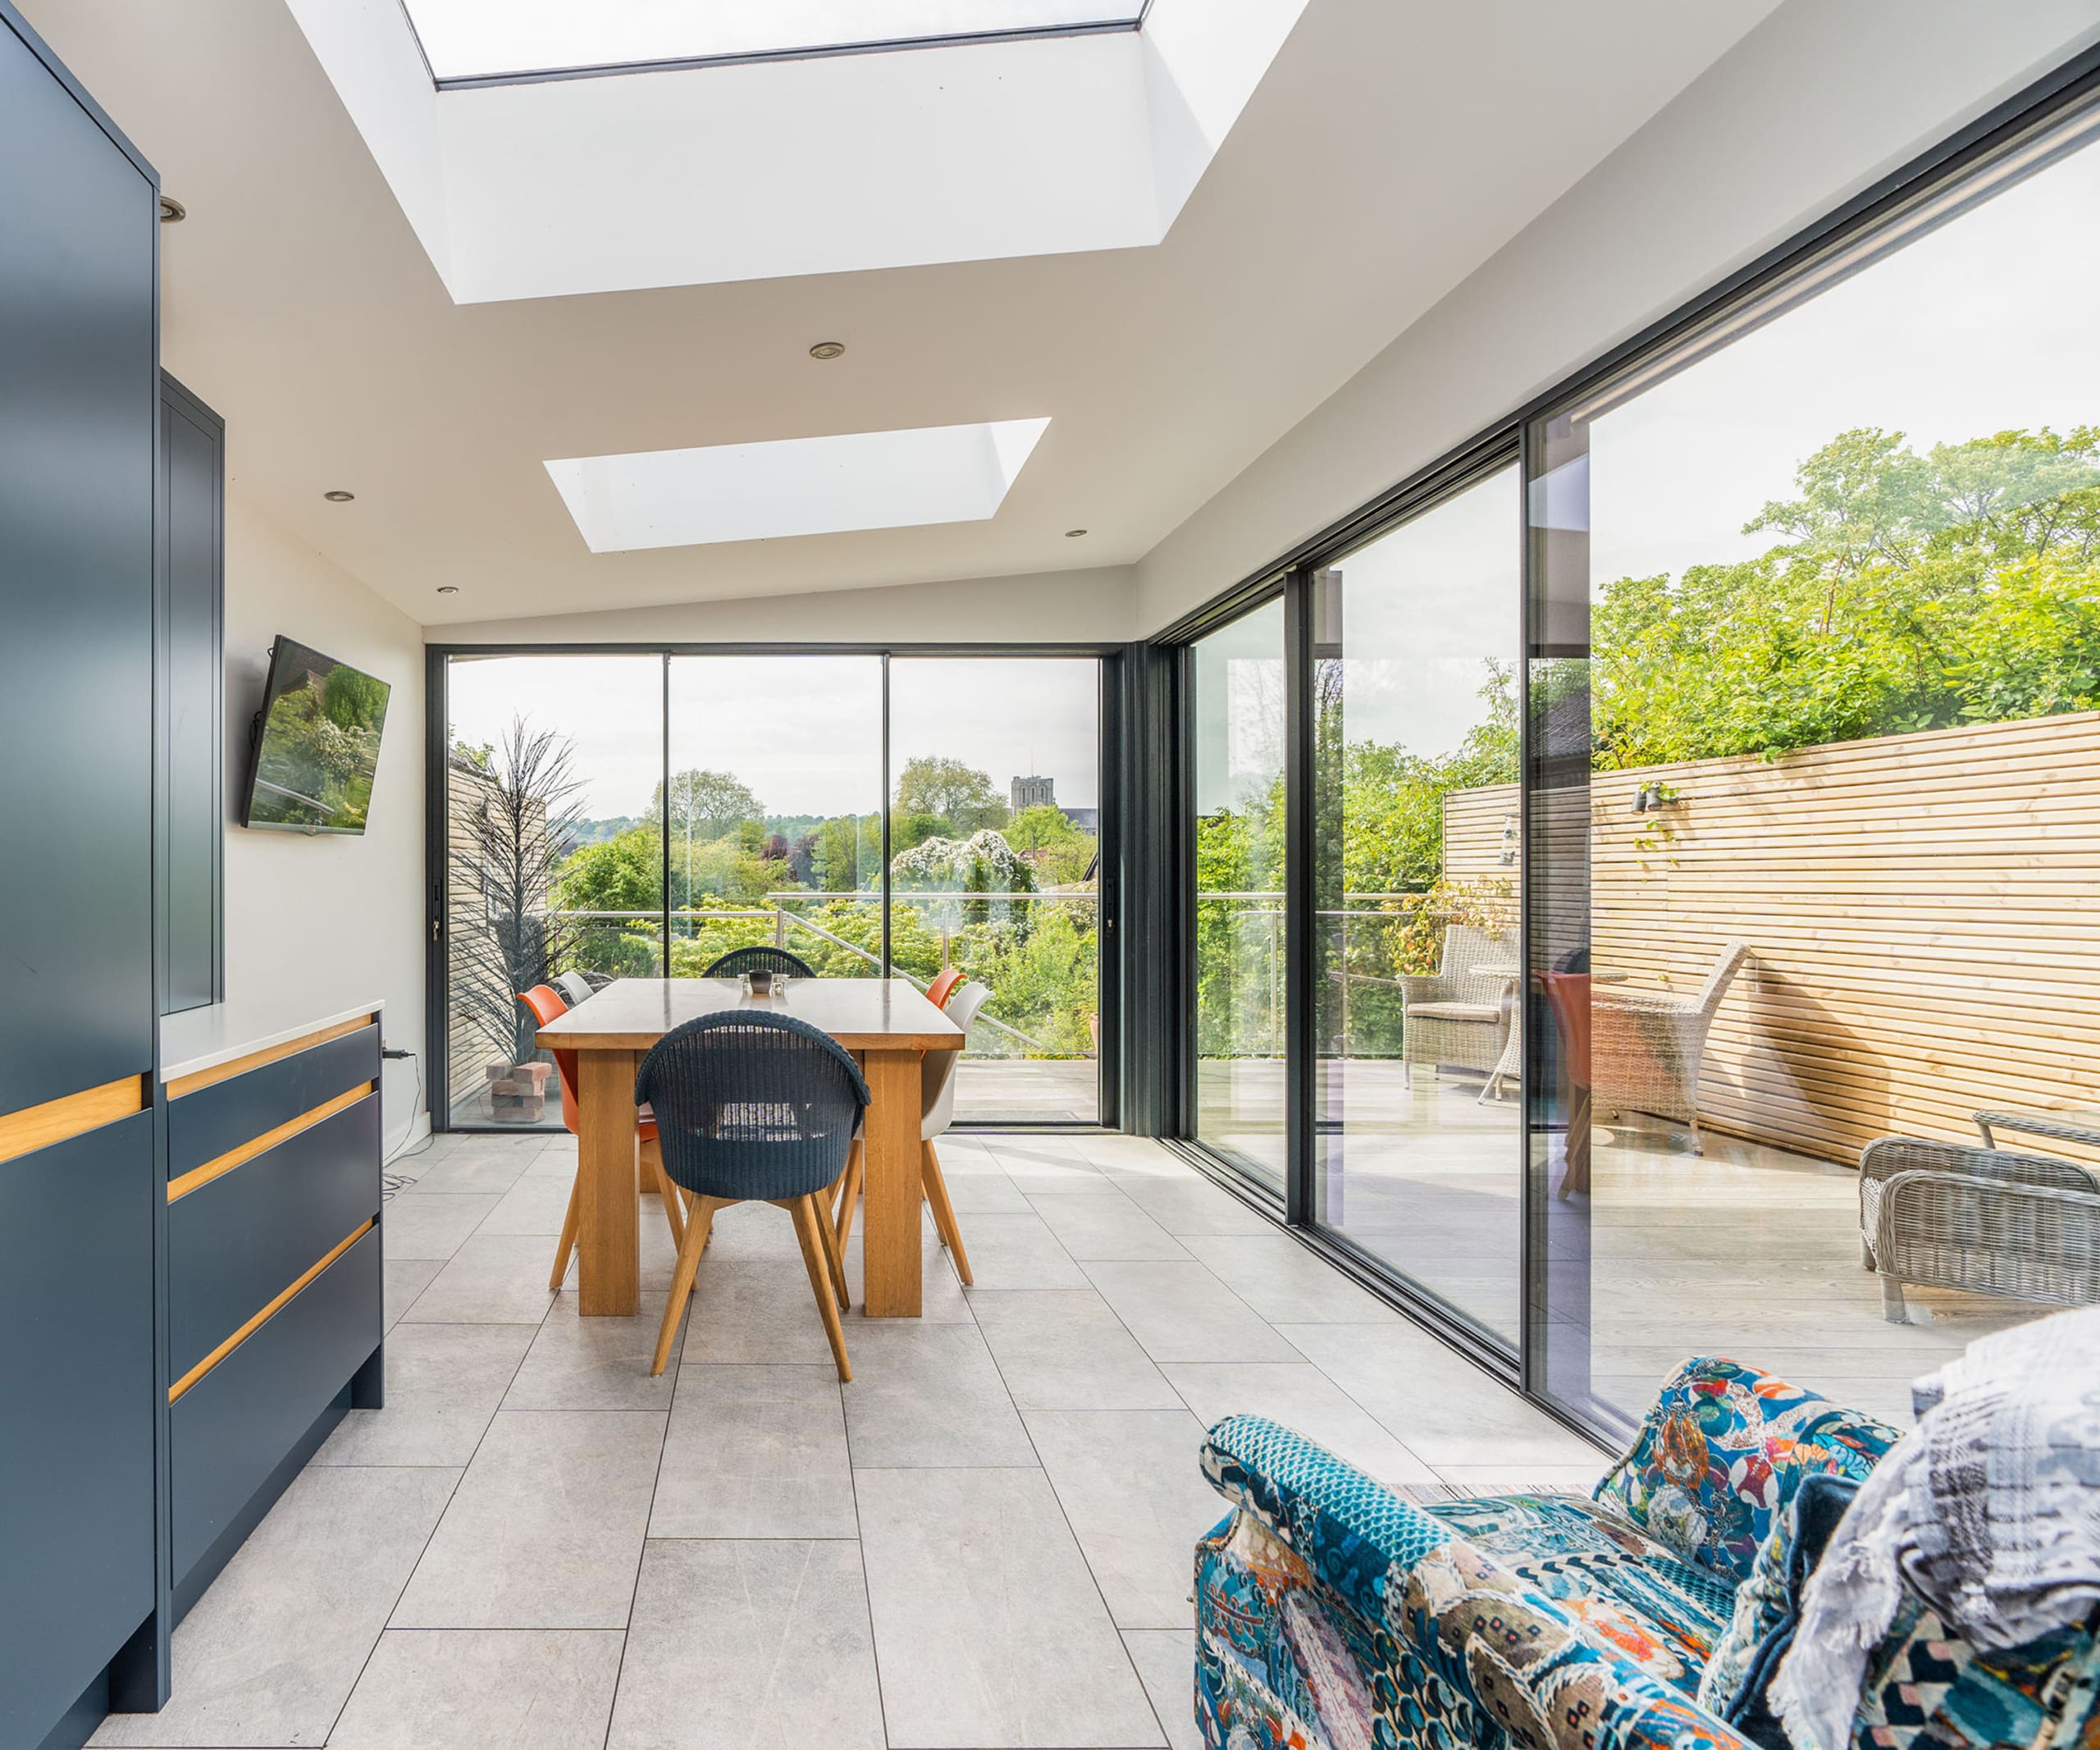 Beautiful kitchen extension with roof lantern and sliding doors.